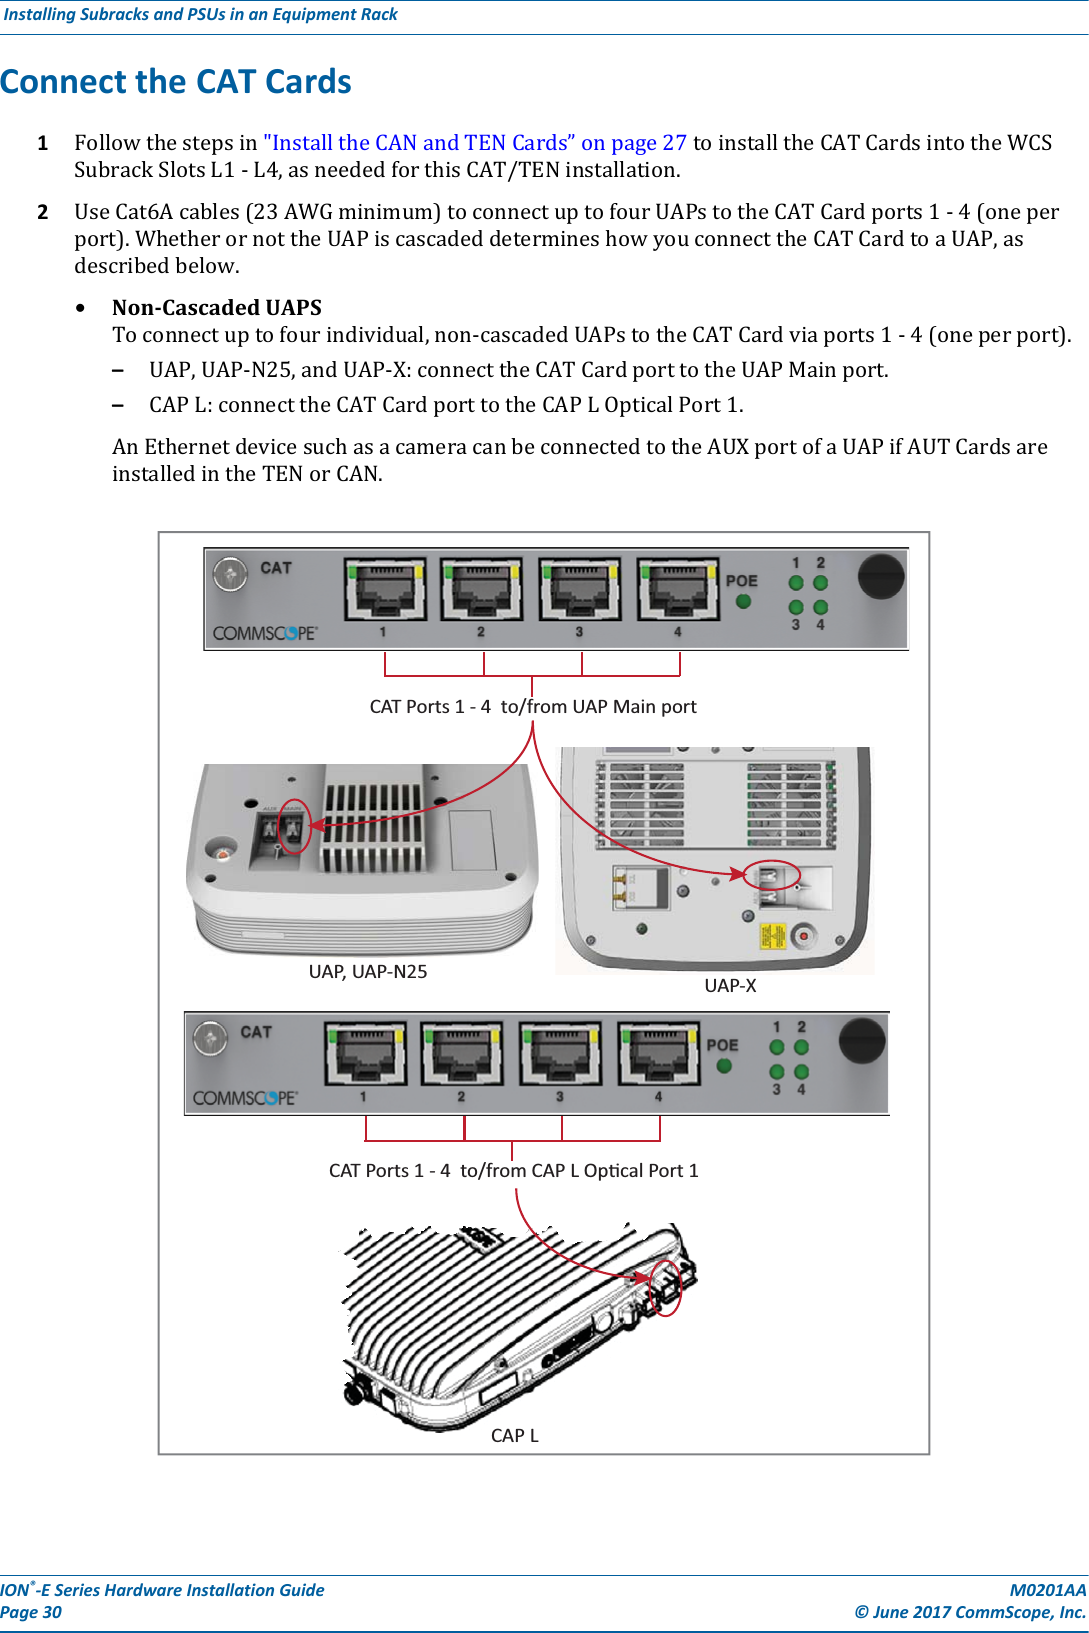 ION®-E Series Hardware Installation Guide M0201AA Page 30 © June 2017 CommScope, Inc. Installing Subracks and PSUs in an Equipment Rack  Connect the CAT Cards1Followthestepsin&quot;InstalltheCANandTENCards”onpage27toinstalltheCATCardsintotheWCSSubrackSlotsL1-L4,asneededforthisCAT/TENinstallation.2UseCat6Acables(23AWGminimum)toconnectuptofourUAPstotheCATCardports1-4(oneperport).WhetherornottheUAPiscascadeddetermineshowyouconnecttheCATCardtoaUAP,asdescribedbelow.•Non-CascadedUAPS Toconnectuptofourindividual,non-cascadedUAPstotheCATCardviaports1-4(oneperport).–UAP,UAP-N25,andUAP-X:connecttheCATCardporttotheUAPMainport.–CAPL:connecttheCATCardporttotheCAPLOpticalPort1.AnEthernetdevicesuchasacameracanbeconnectedtotheAUXportofaUAPifAUTCardsareinstalledintheTENorCAN.UAP, UAP-N25 UAP-XCAT Ports 1 - 4  to/from UAP Main portCAT Ports 1 - 4  to/from CAP L Opcal Port 1CAP L